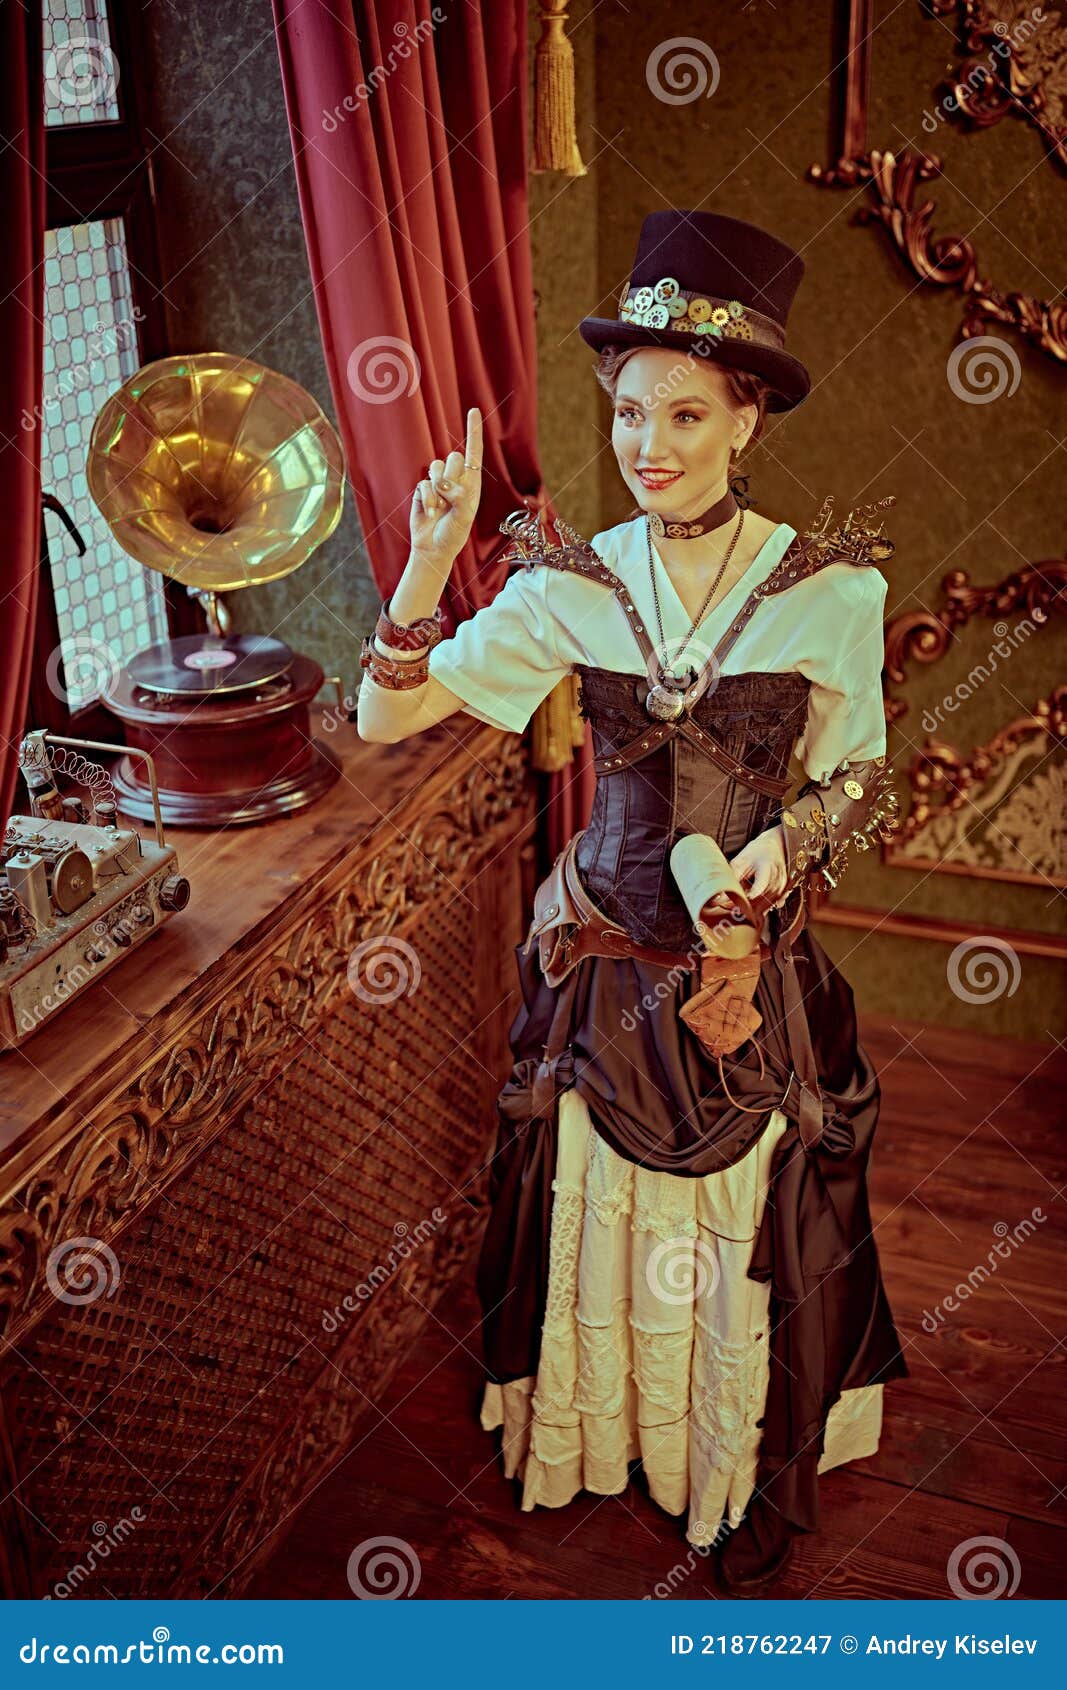 Fantasy world of steampunk stock image. Image of industrial - 218762247